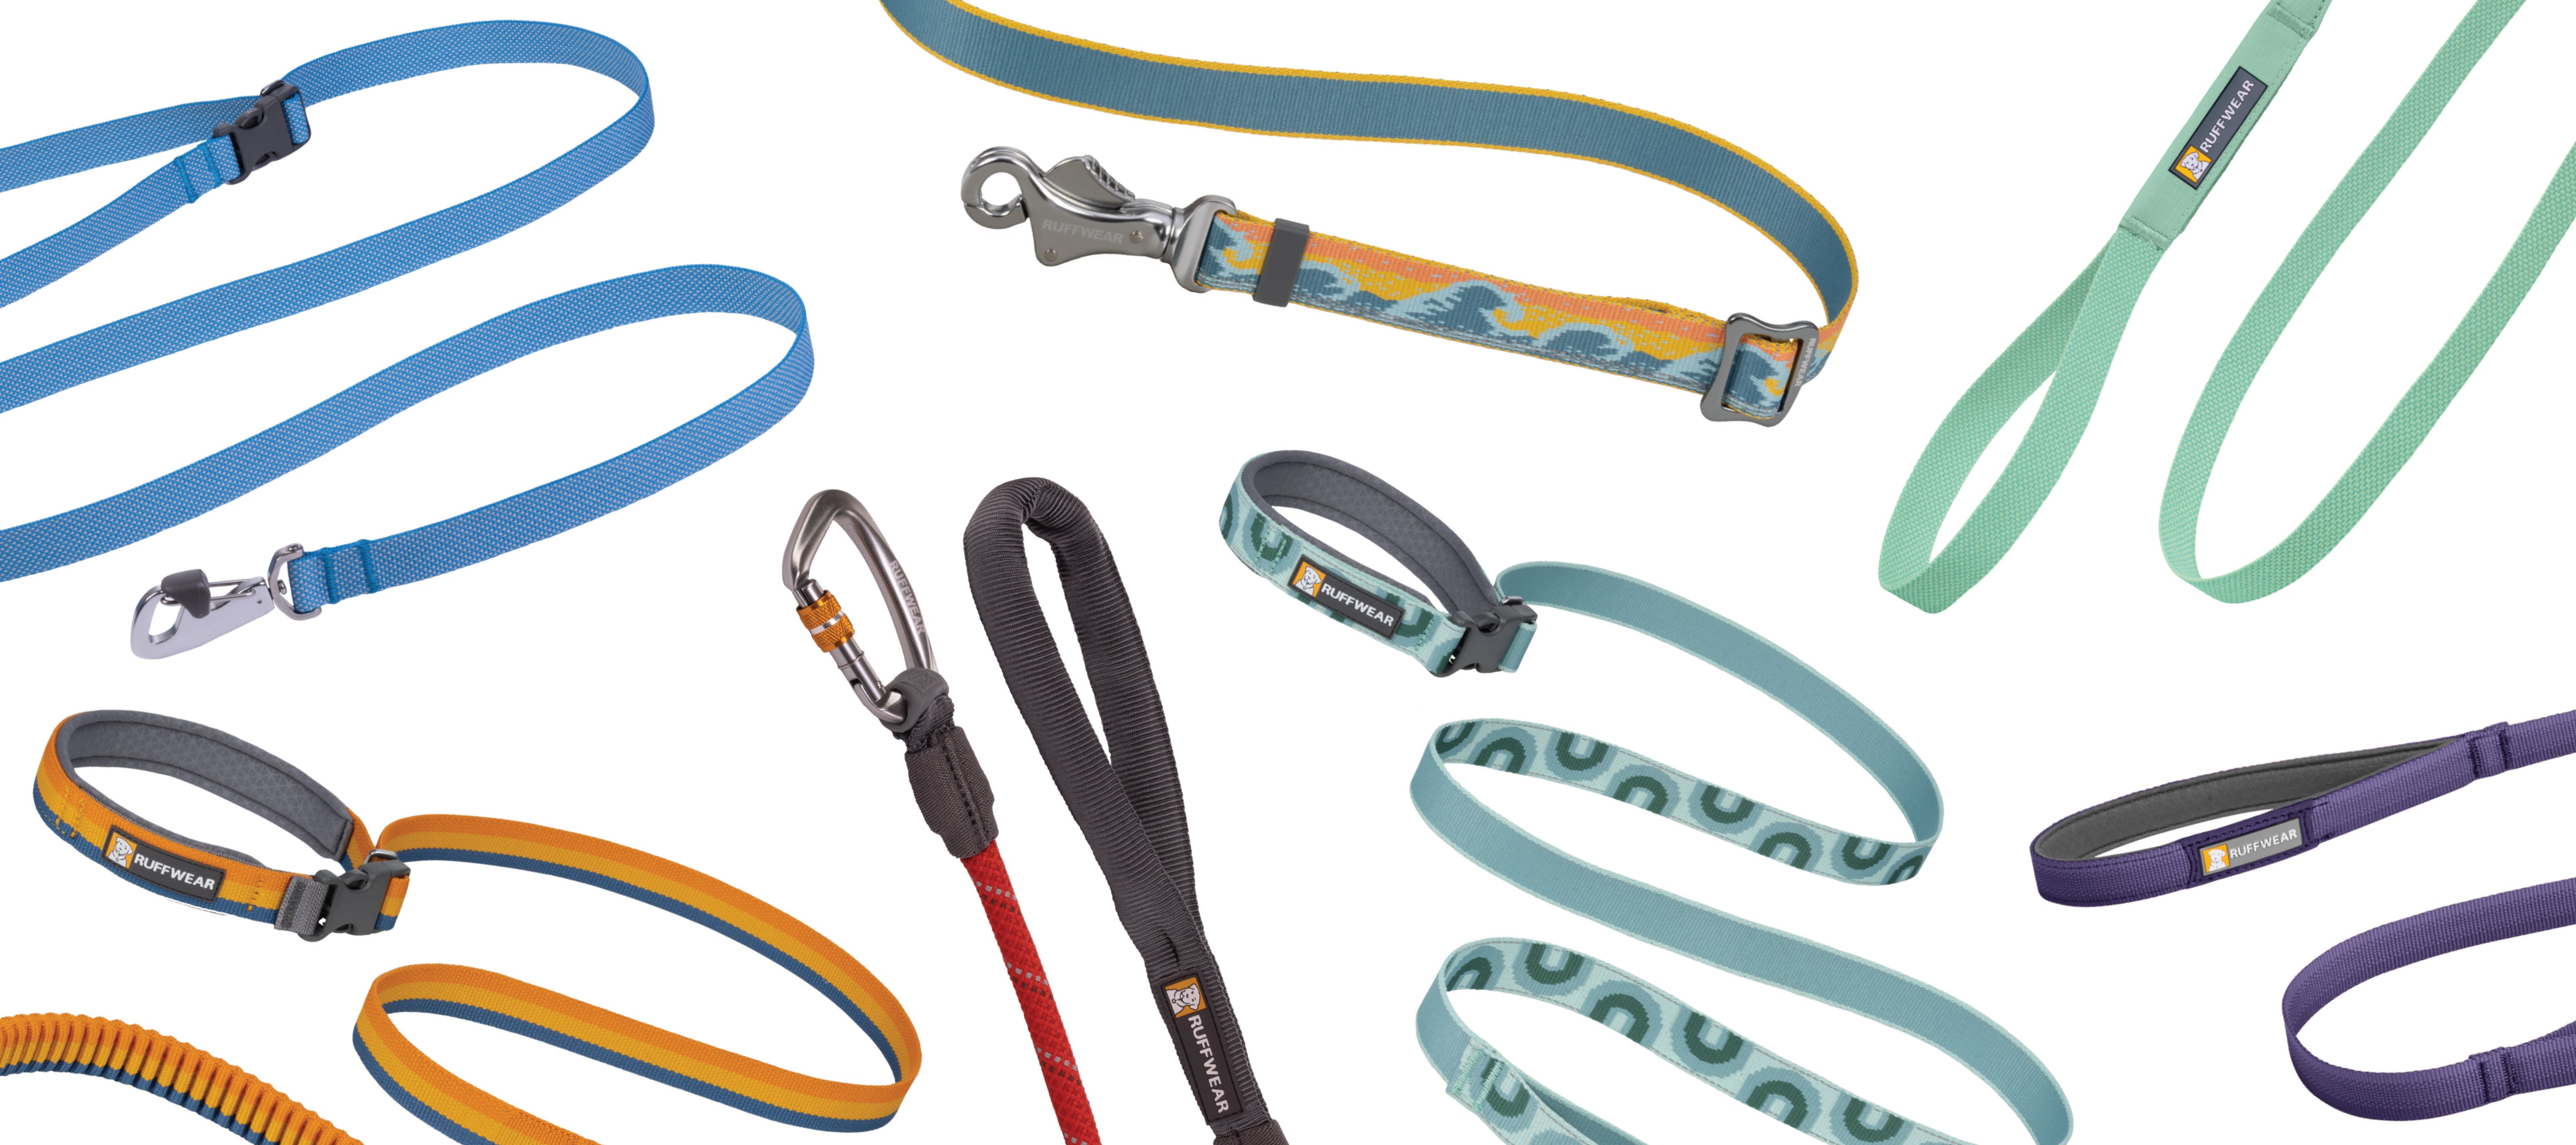 How to Choose the Best Dog Leash